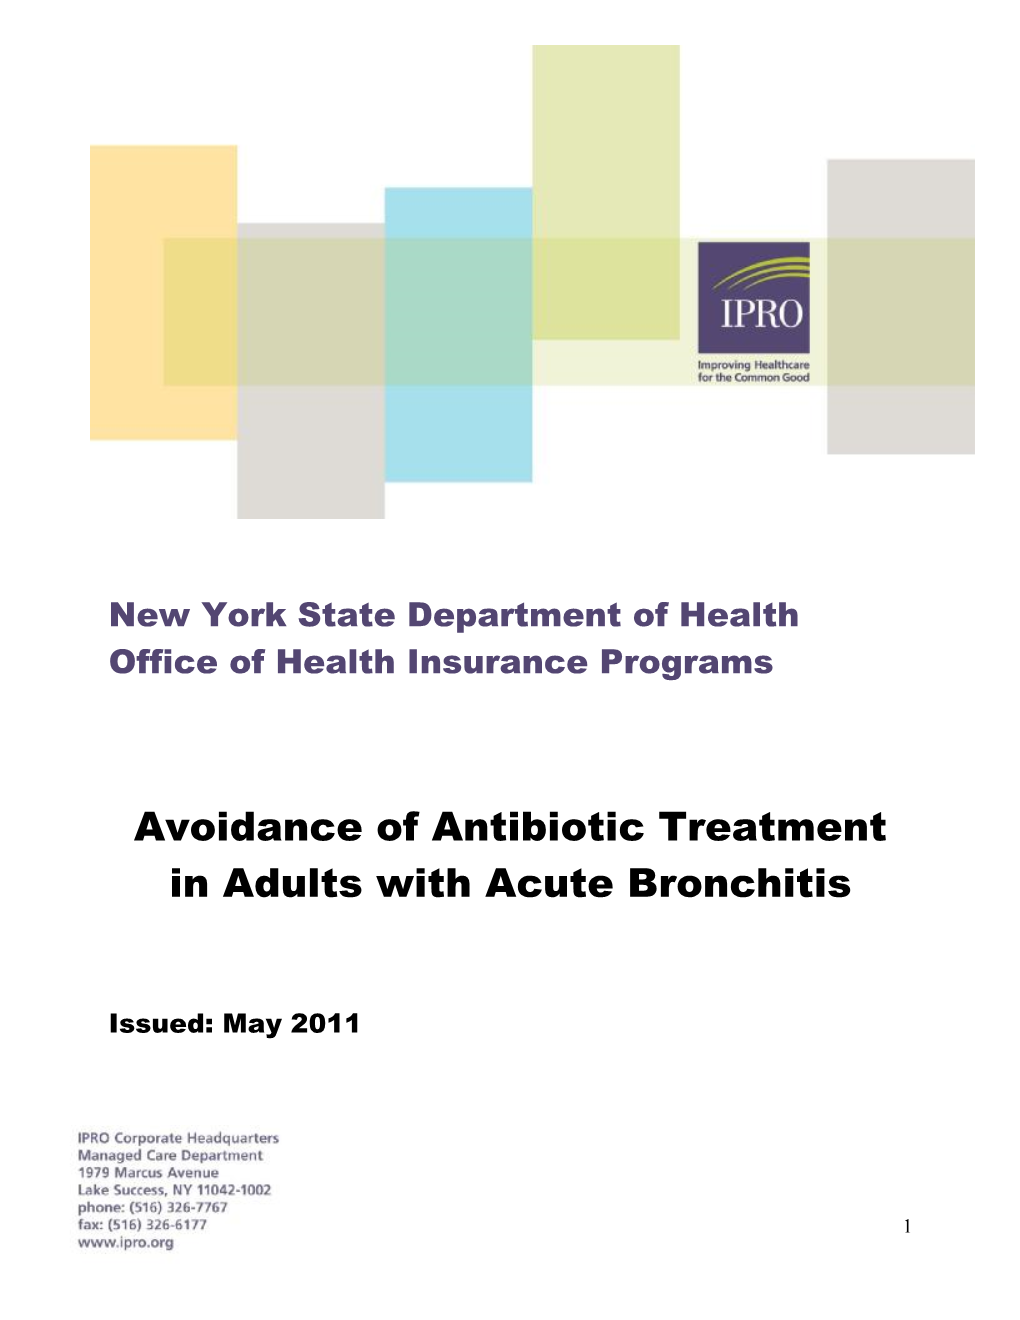 Avoidance of Antibiotic Treatment in Adults with Acute Bronchitis